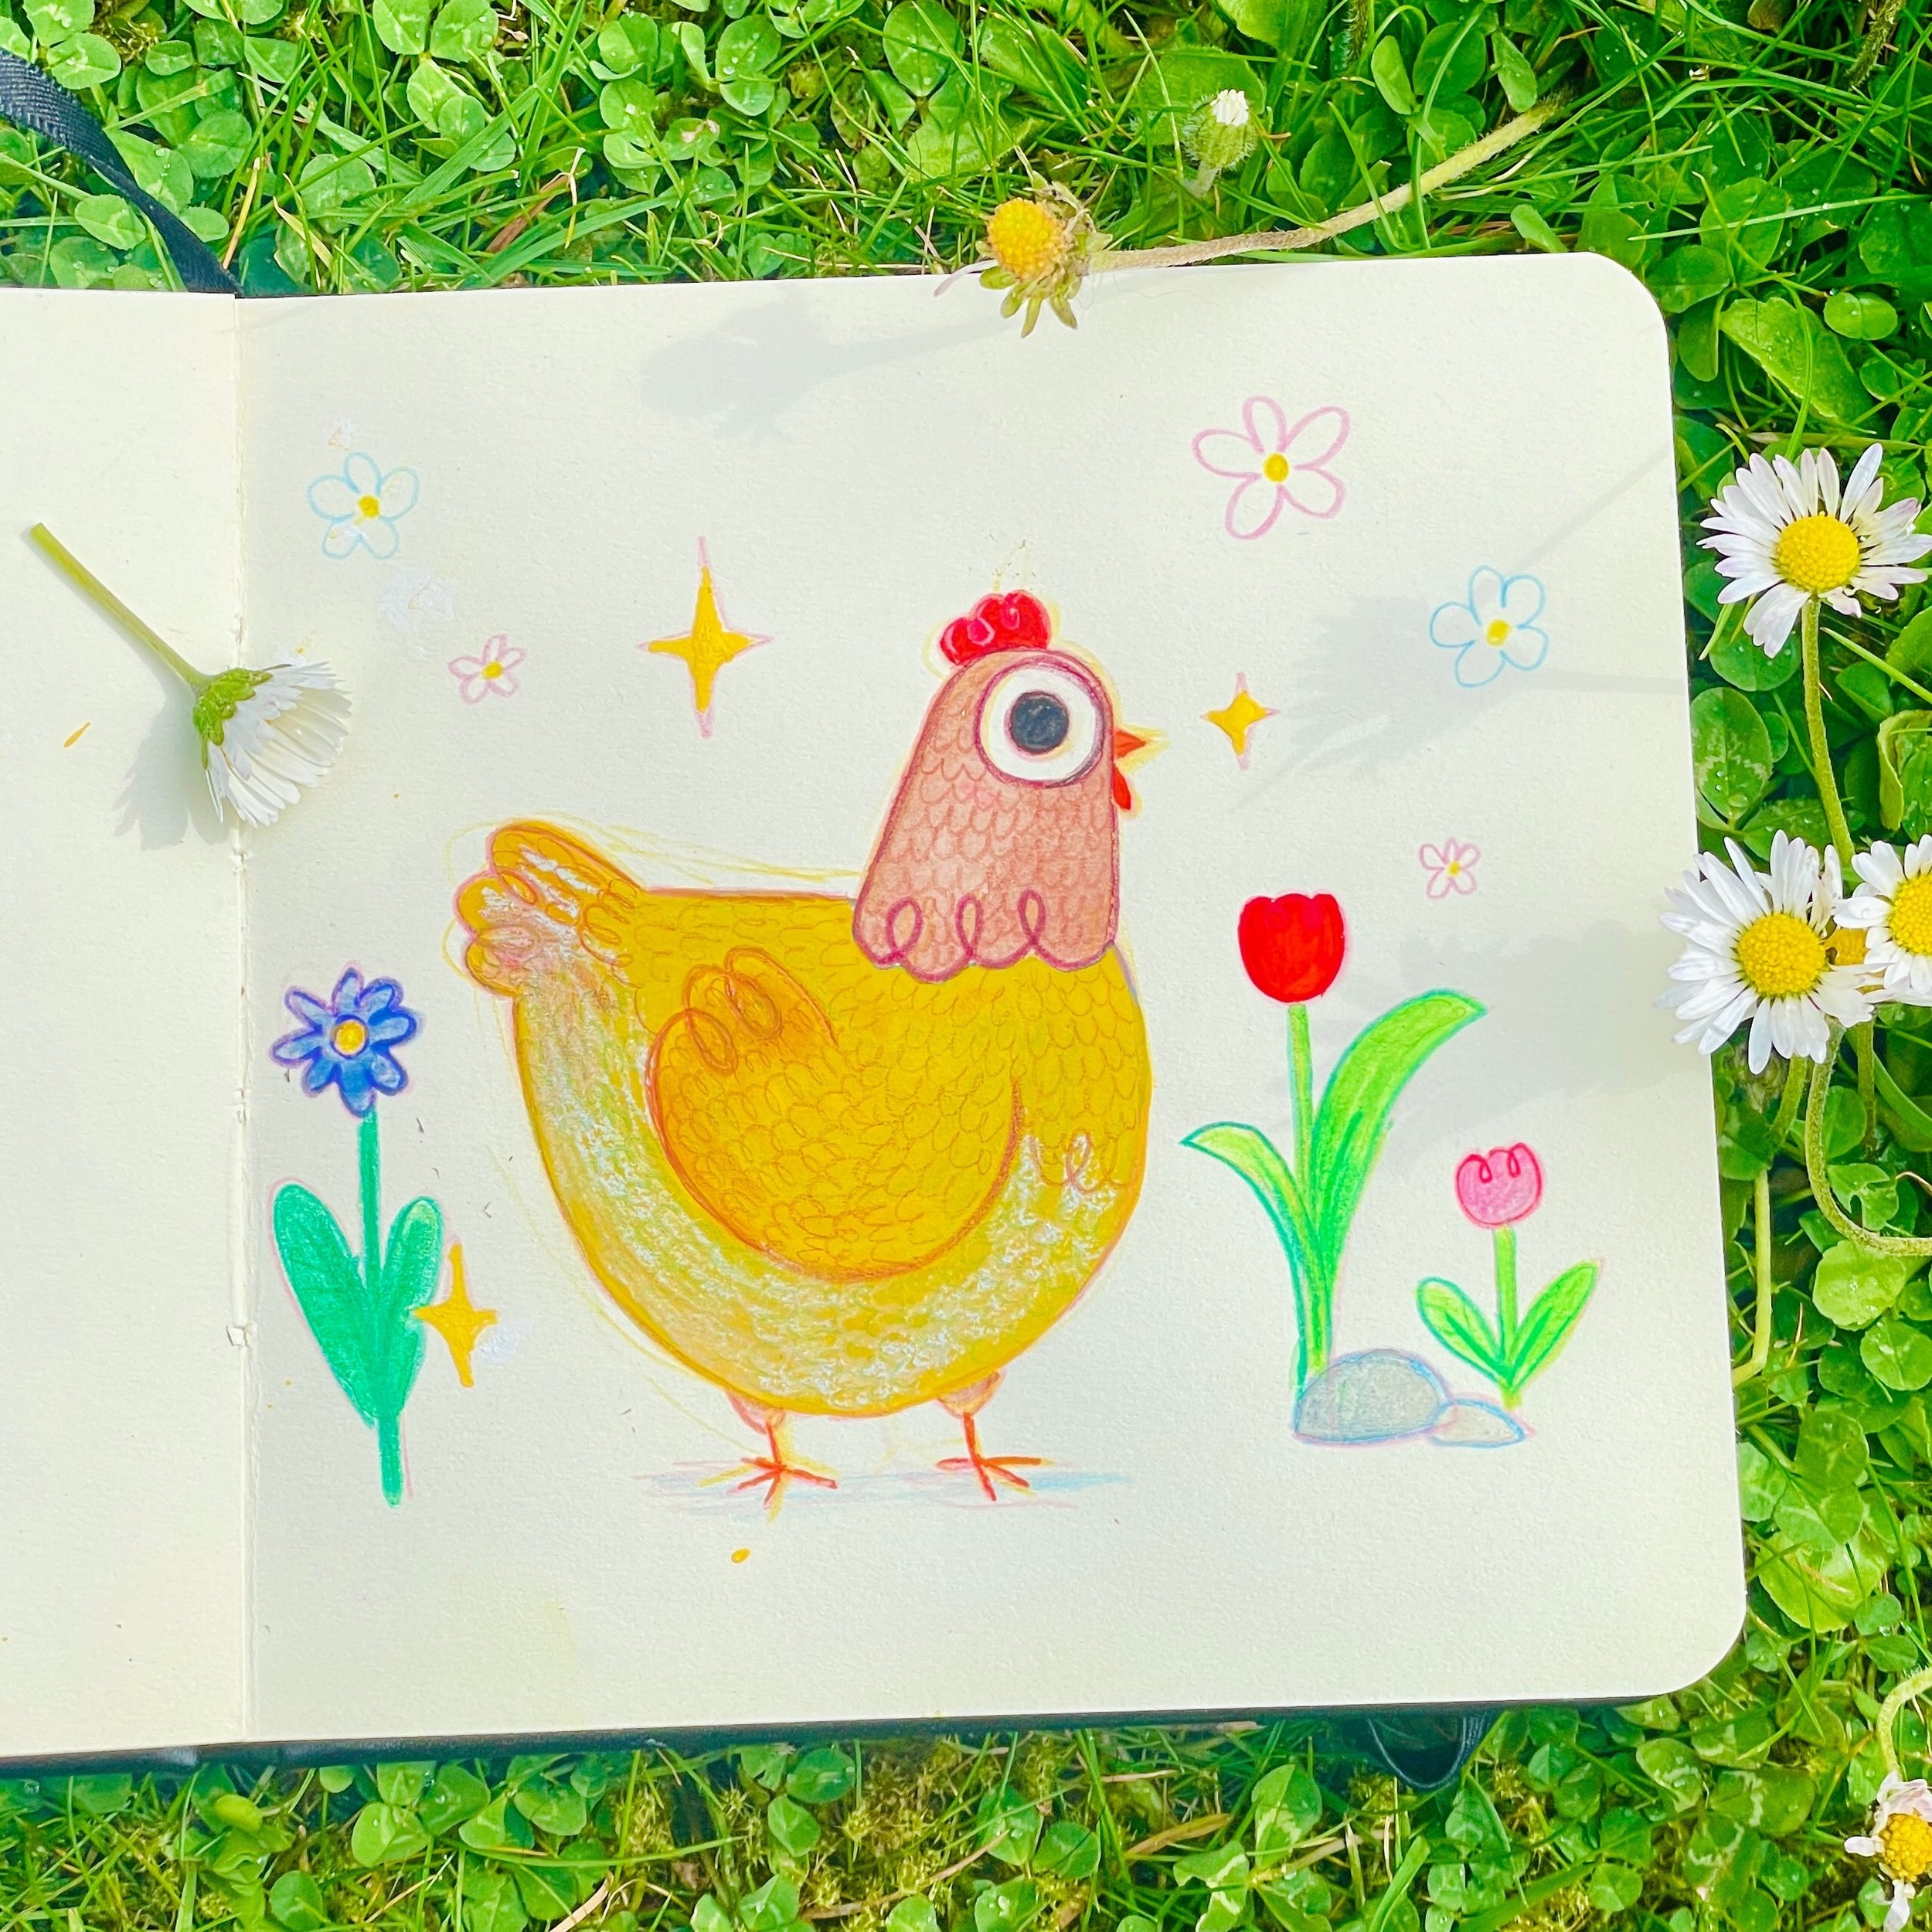 A chicken for your day 

#chicken 
#illustration #doodle #sketchbook